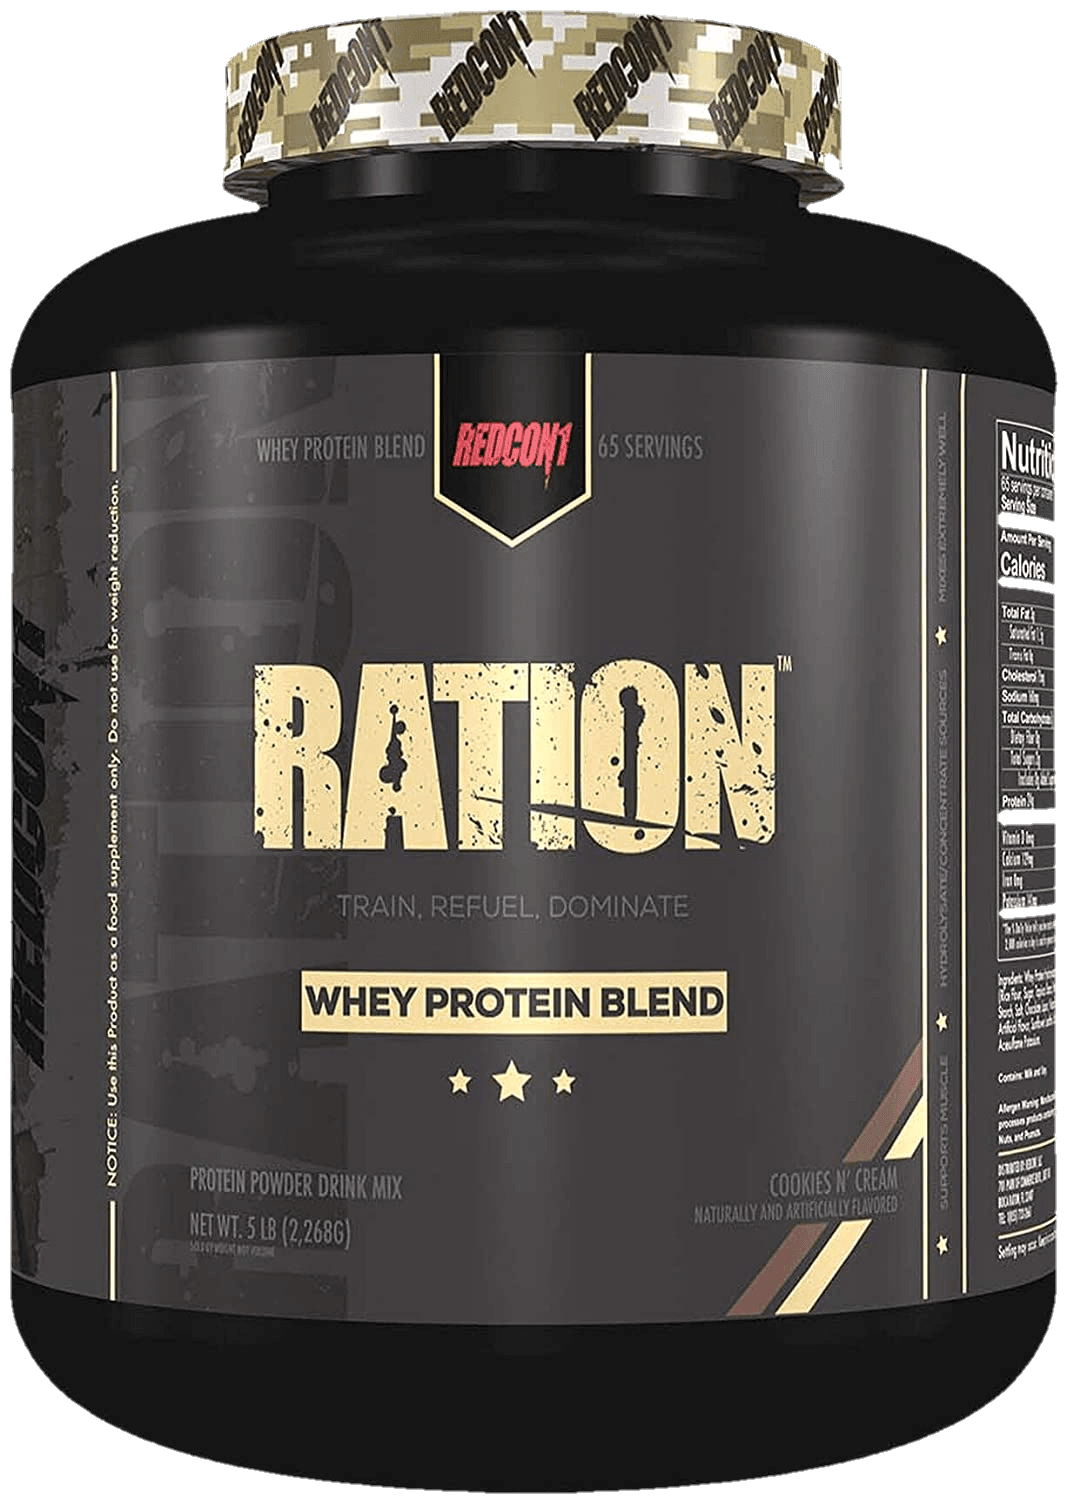 Ration Whey - The Supplements Factory